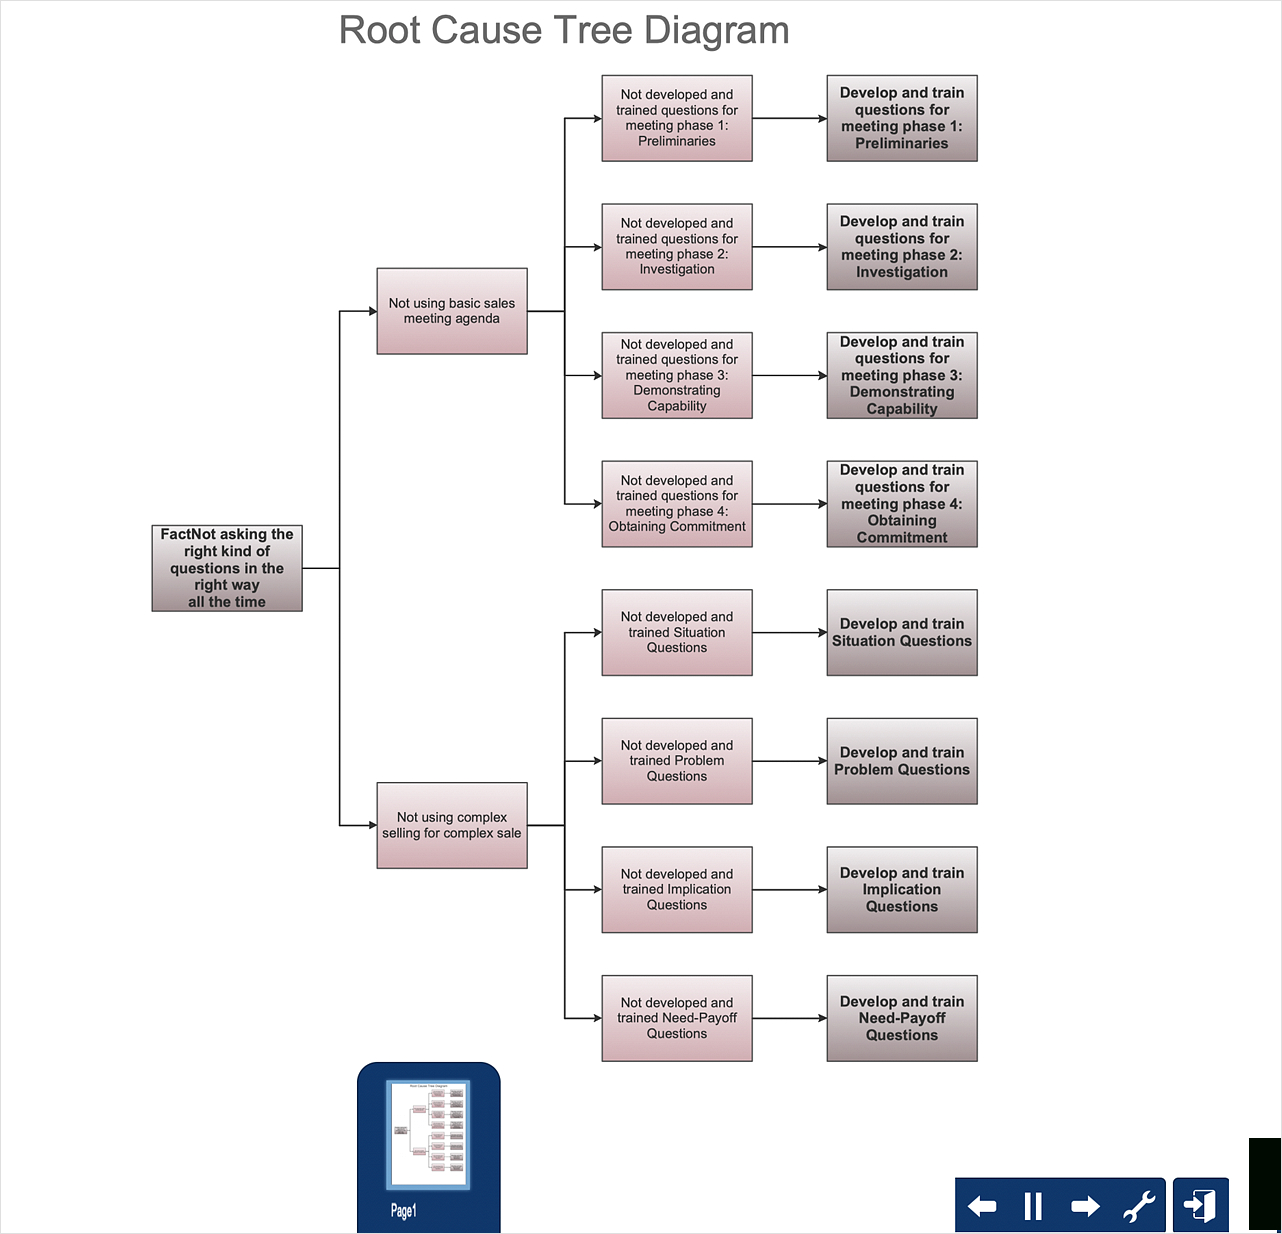 Root Cause Analysis Tree Diagram – Template | How To Create In Blank Tree Diagram Template